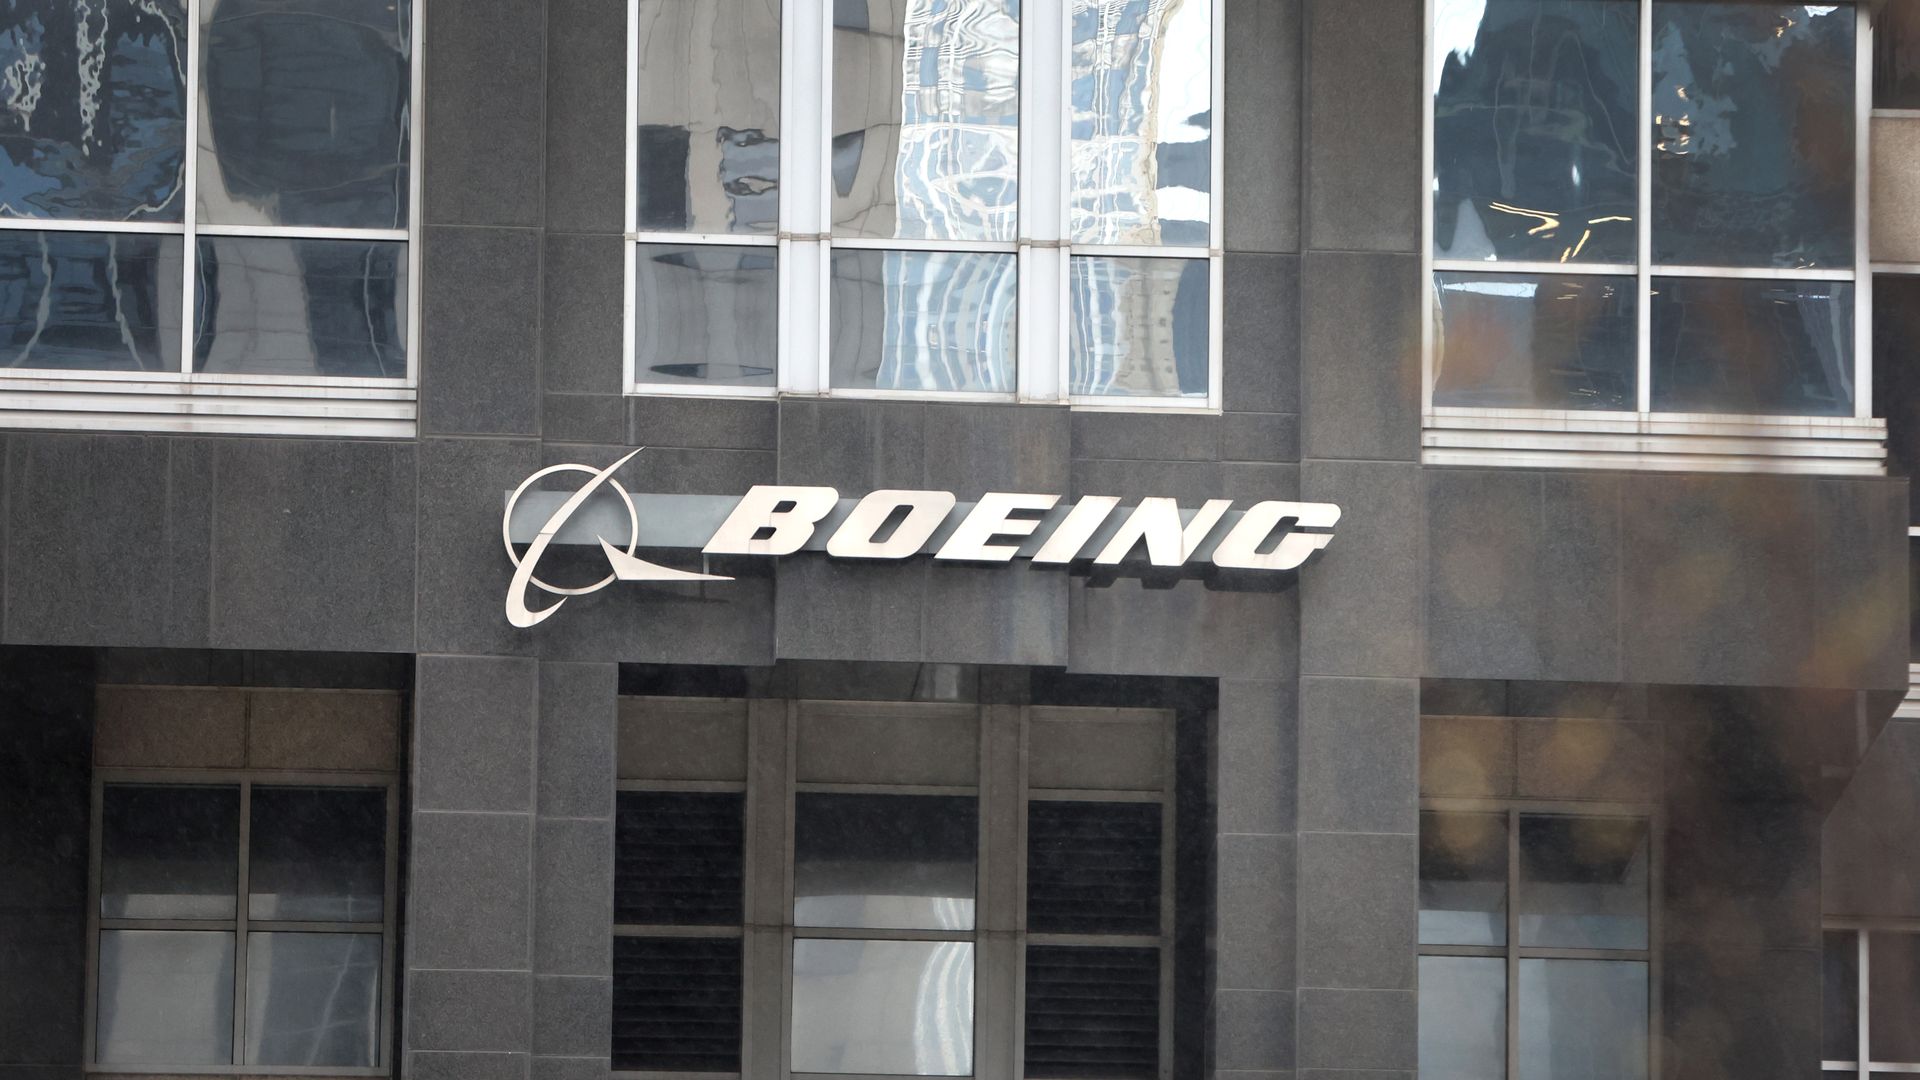 The Boeing Company logo hangs outside of the company's headquarters on May 5, 2022 in Chicago, Illinois.